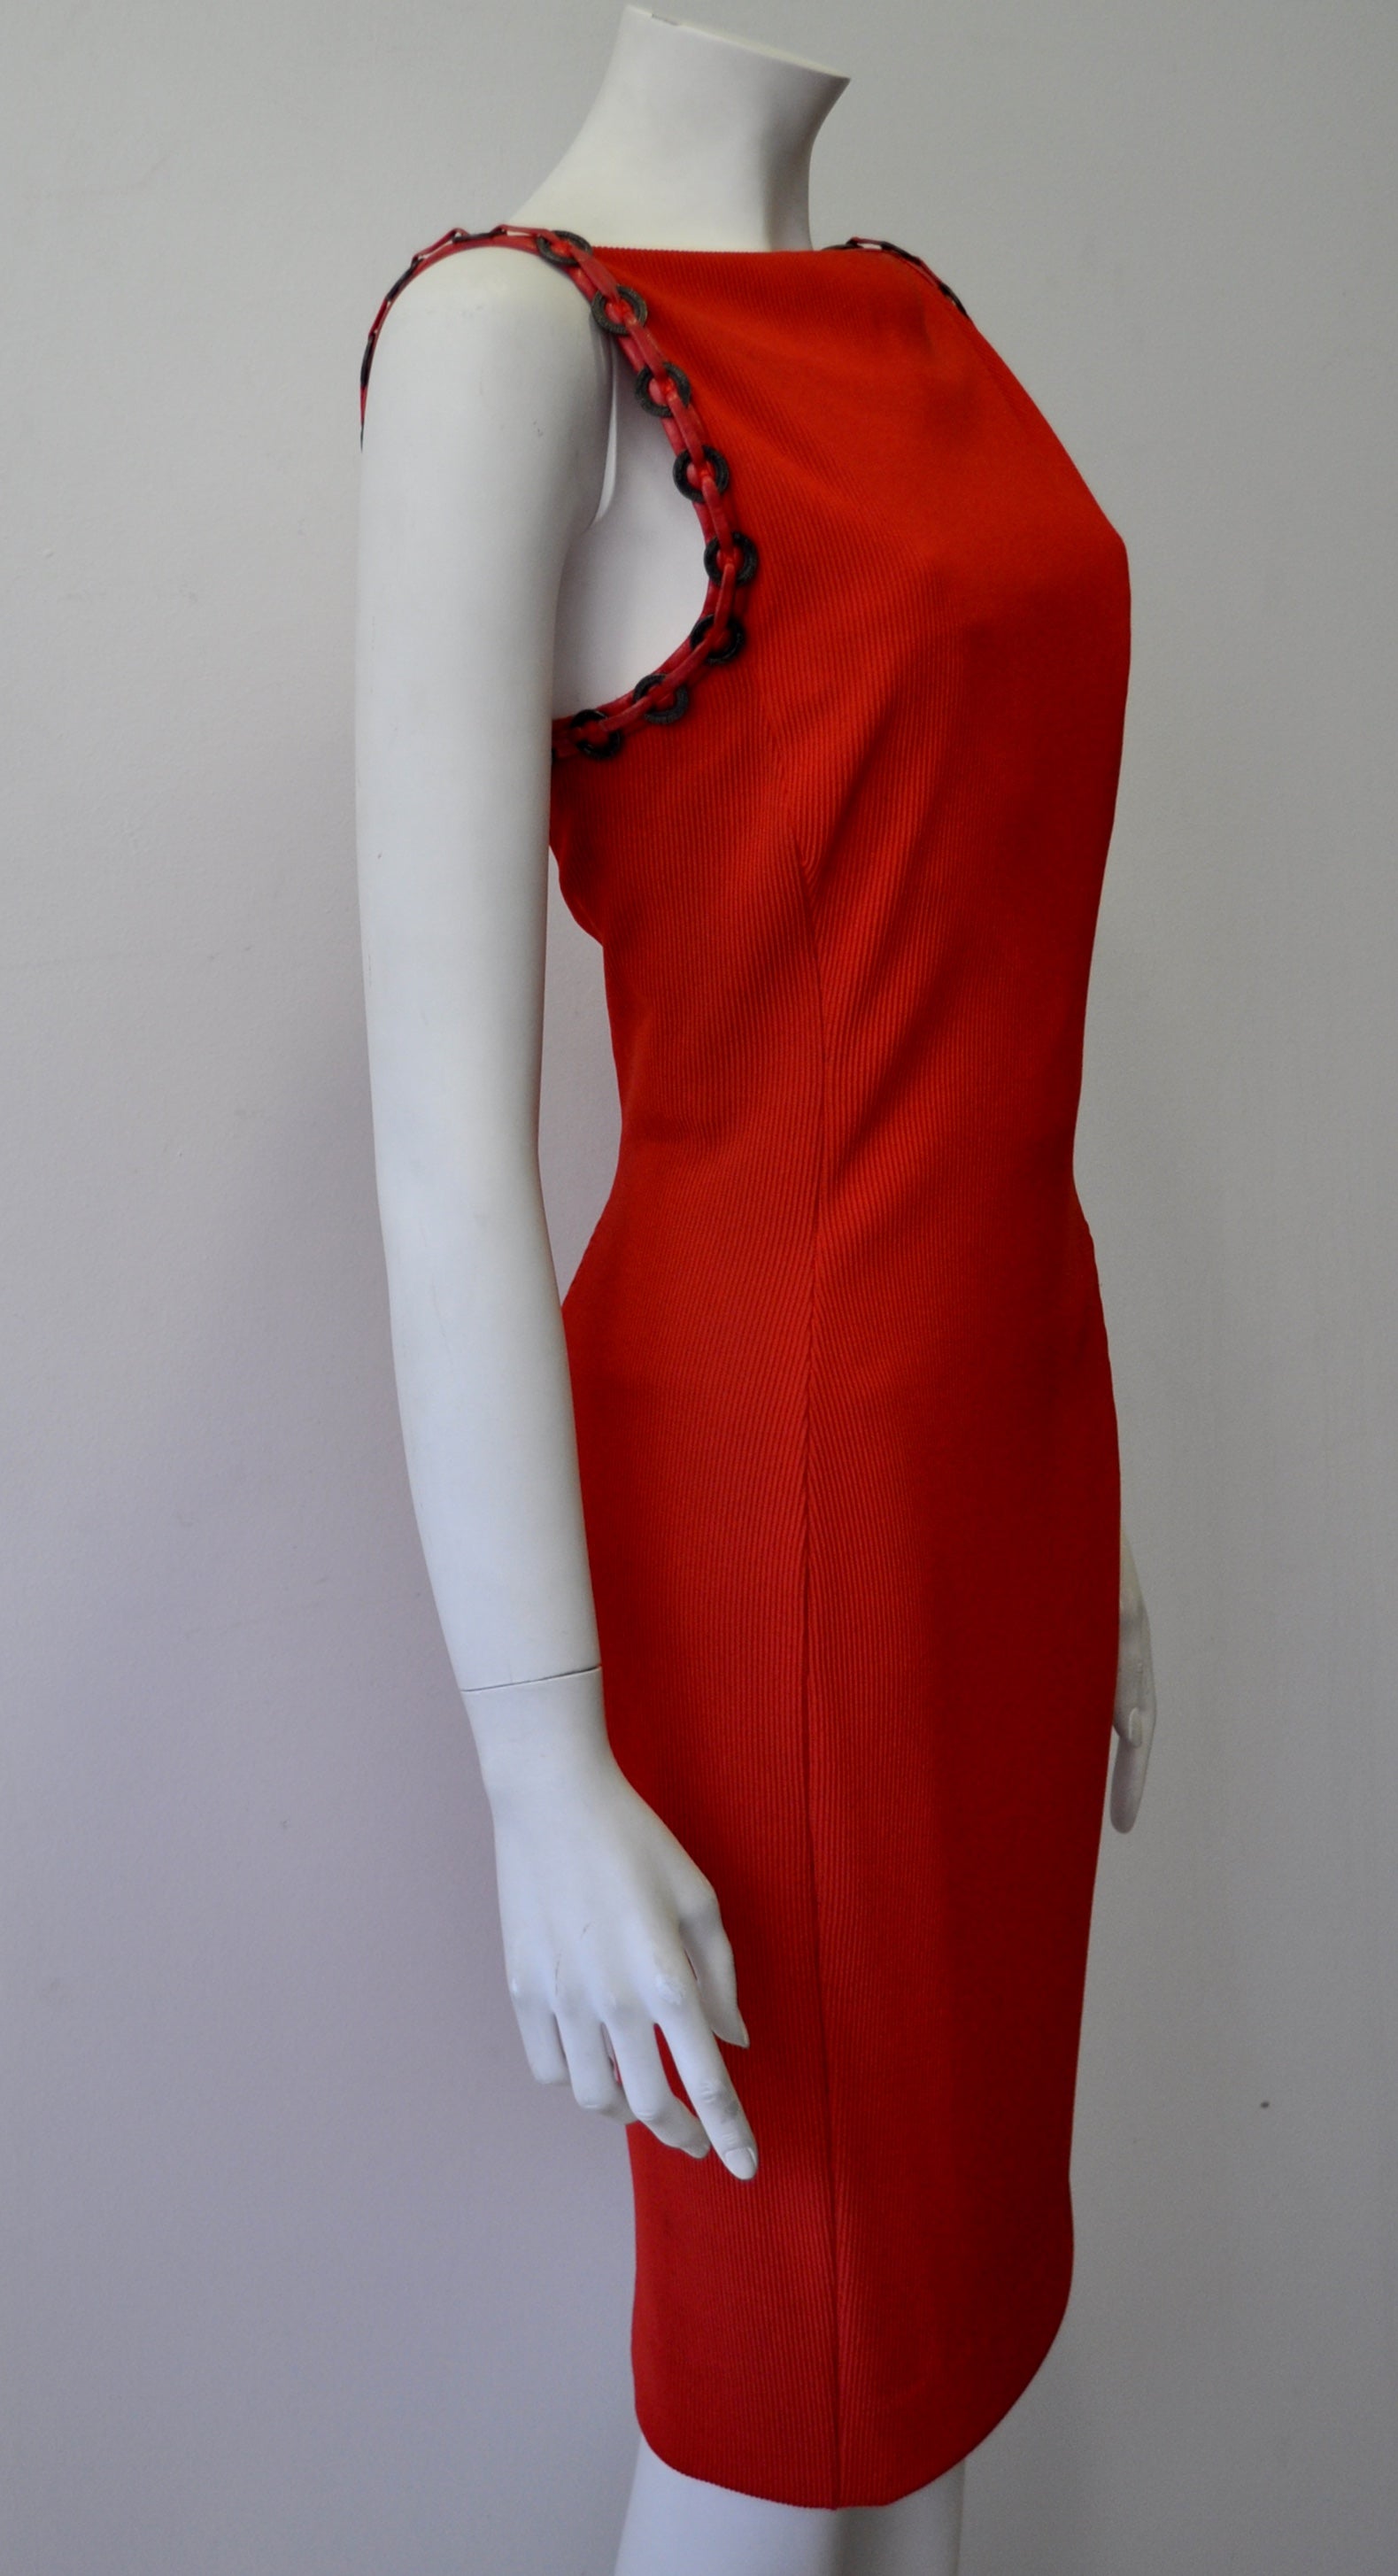 Iconic Gianni Versace Couture Red Siren Bodycon Dress For Sale at 1stDibs